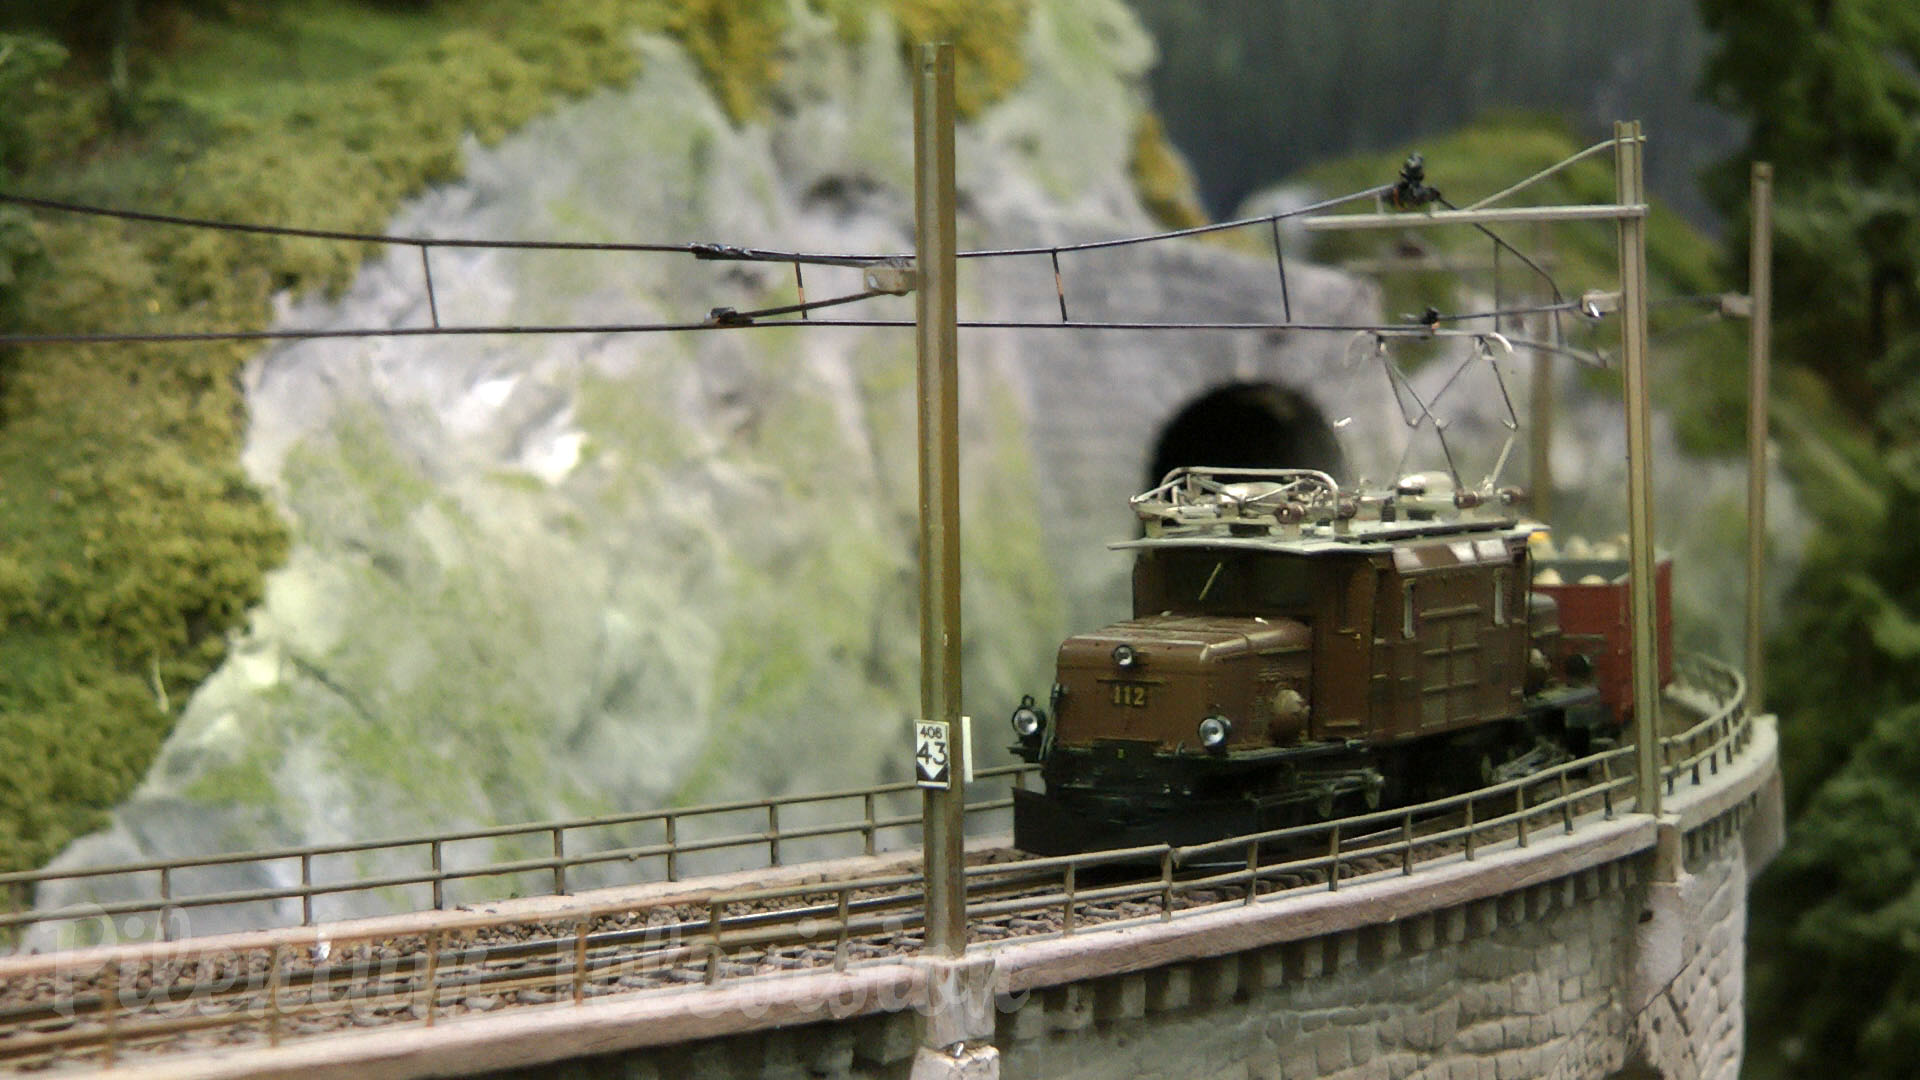 Model railroad layout of Swiss Railways in the Canton of the Grisons - Narrow gauge HO model trains